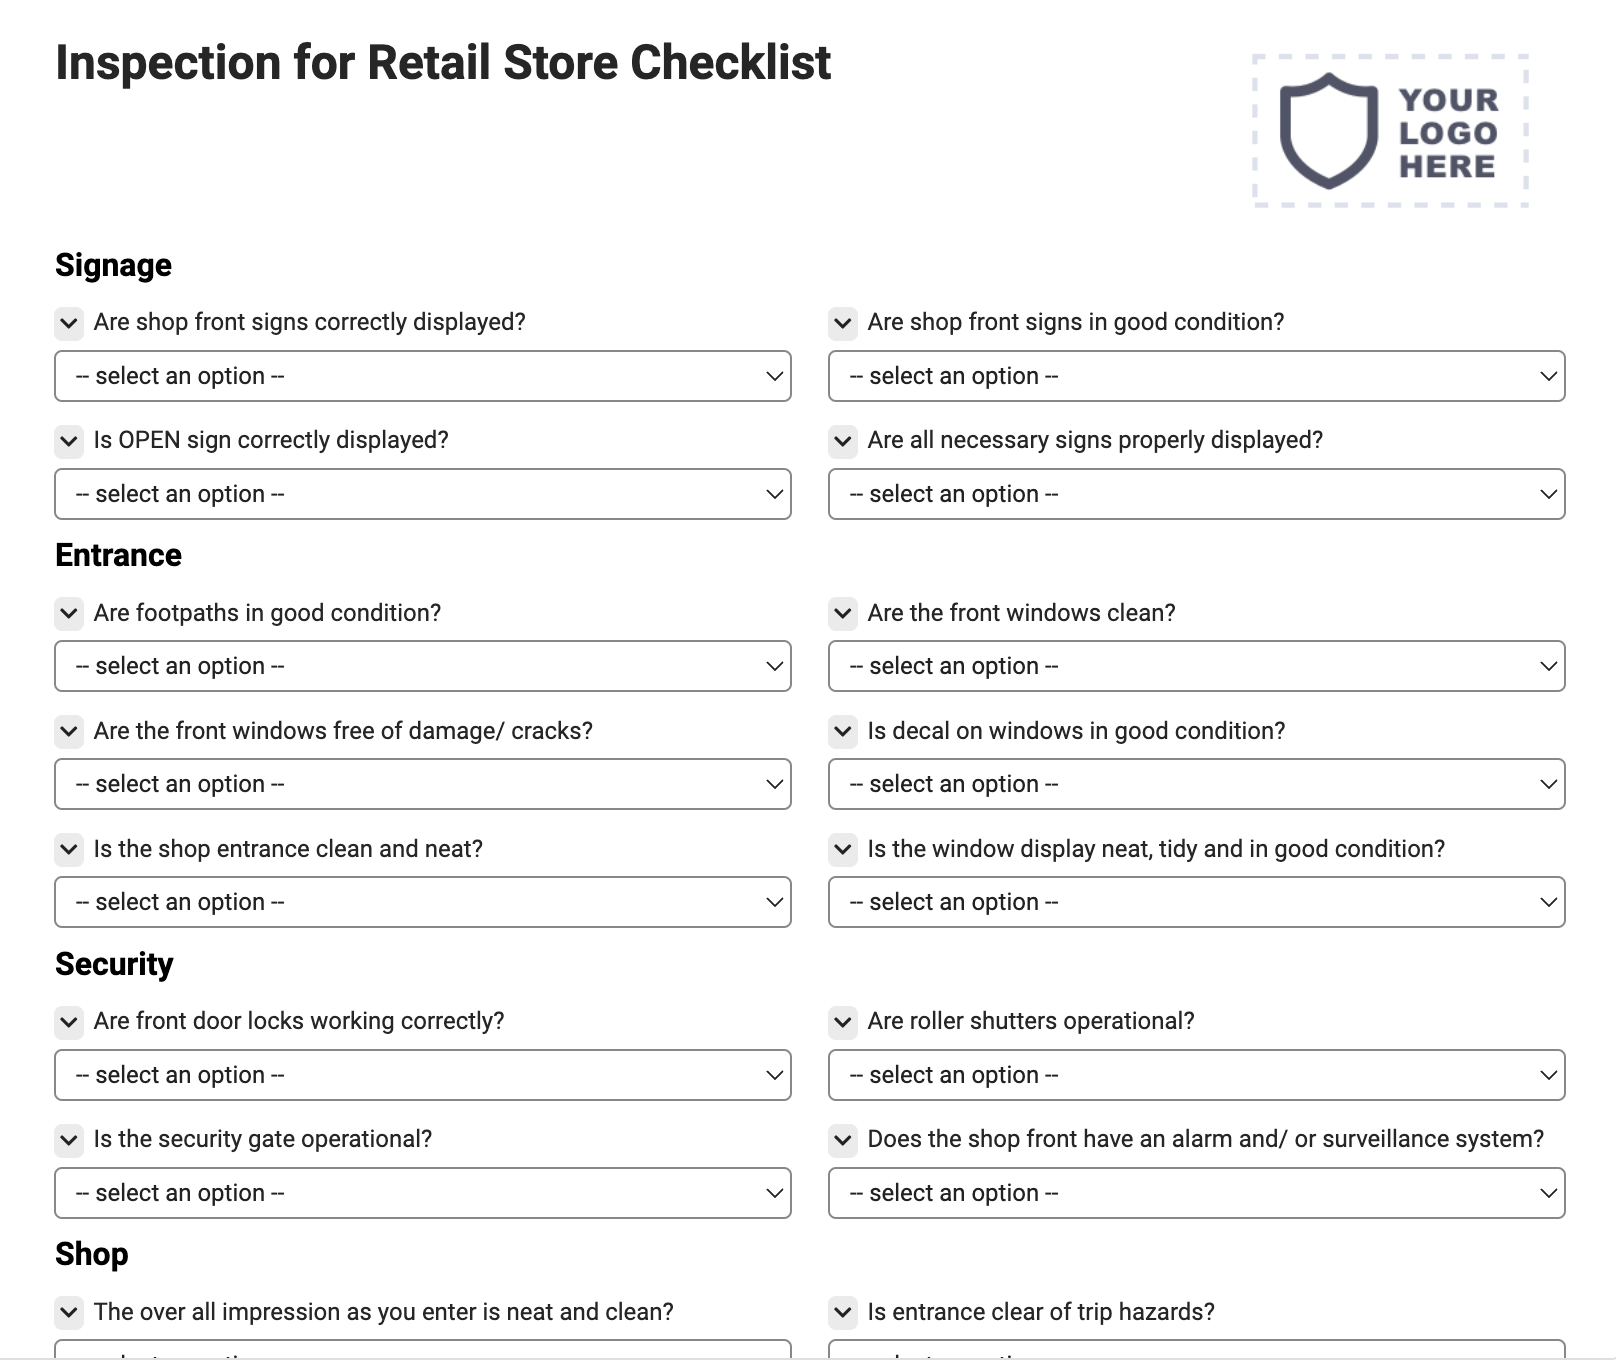 Inspection for Retail Store Checklist